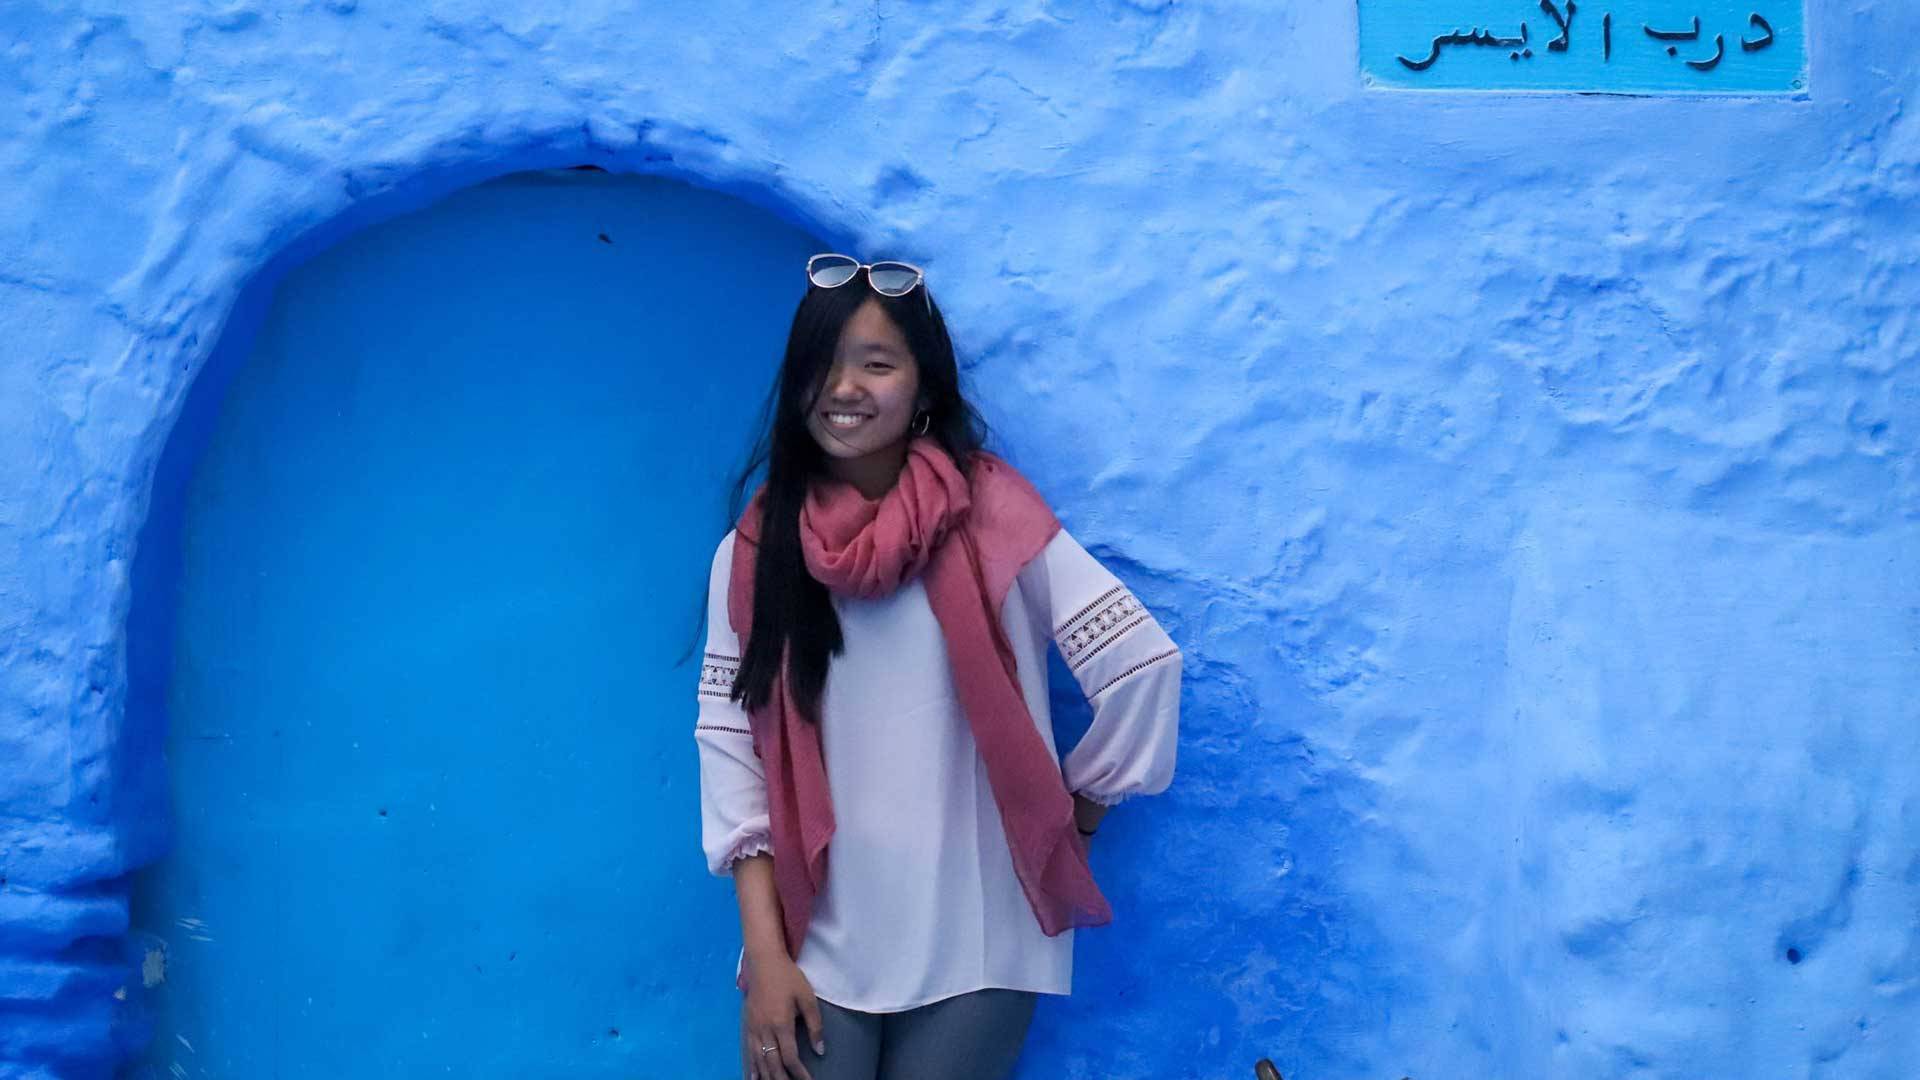 Justine Hu leans against a blue wall with a sign in Arabic on it